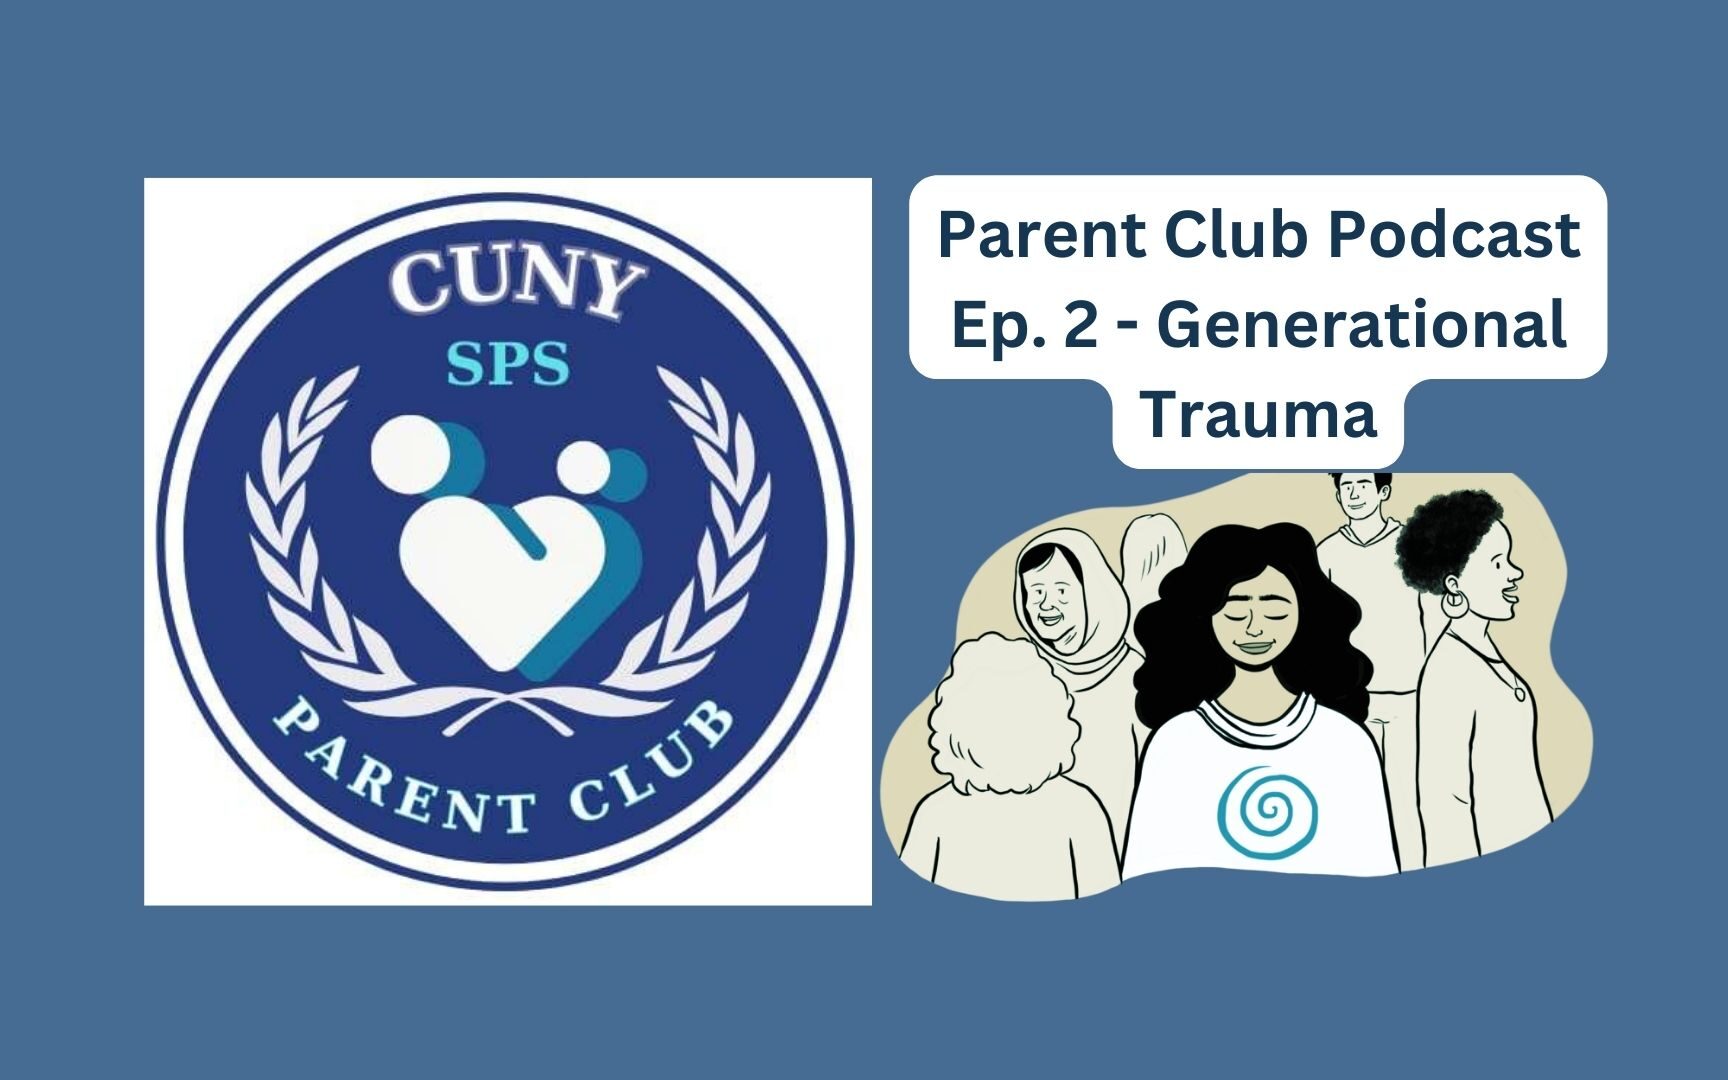 A poster for the CUNY SPS Parent Club podcast episode two, "Generational Trauma" with the Parent Club logo.